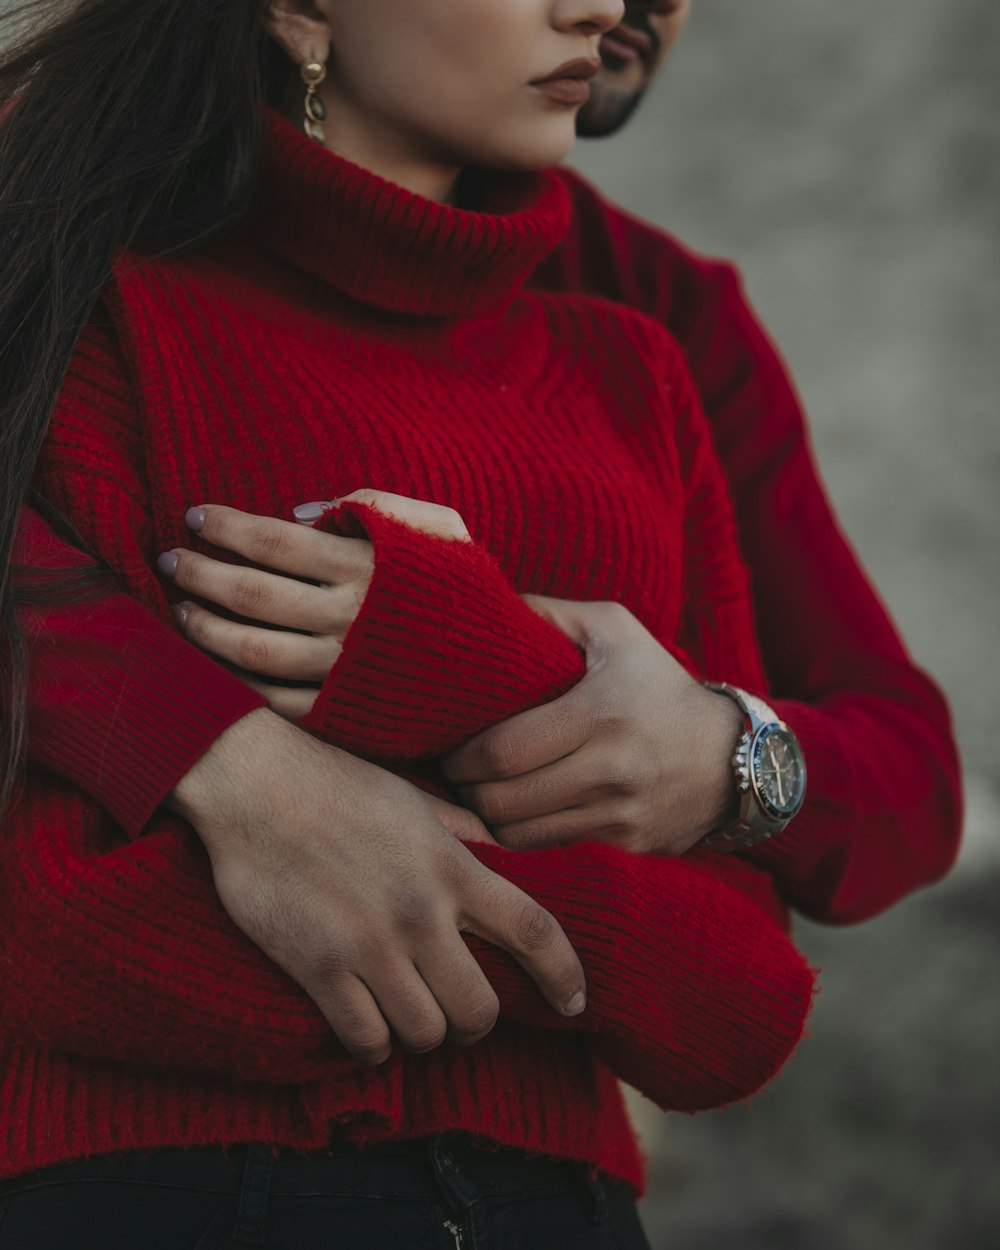 woman in red sweater wearing silver ring